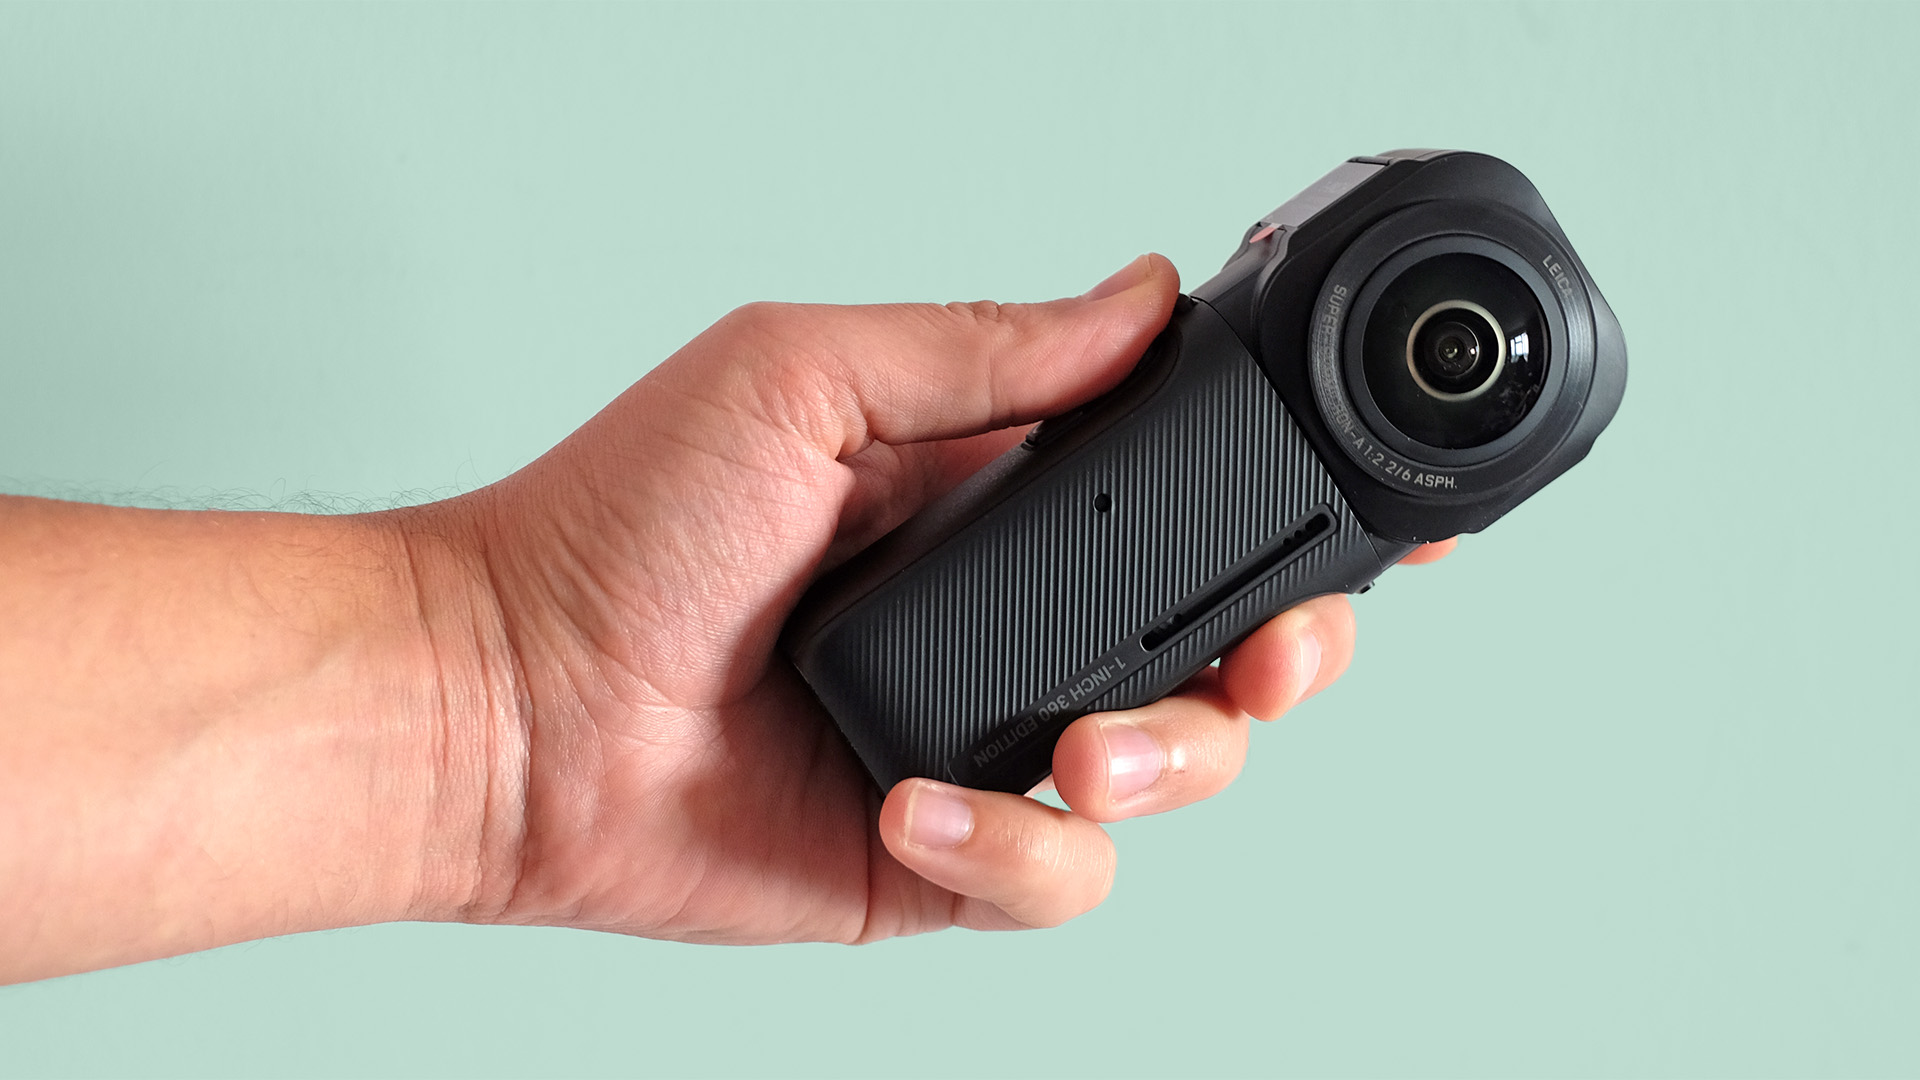 Insta360 One RS Review